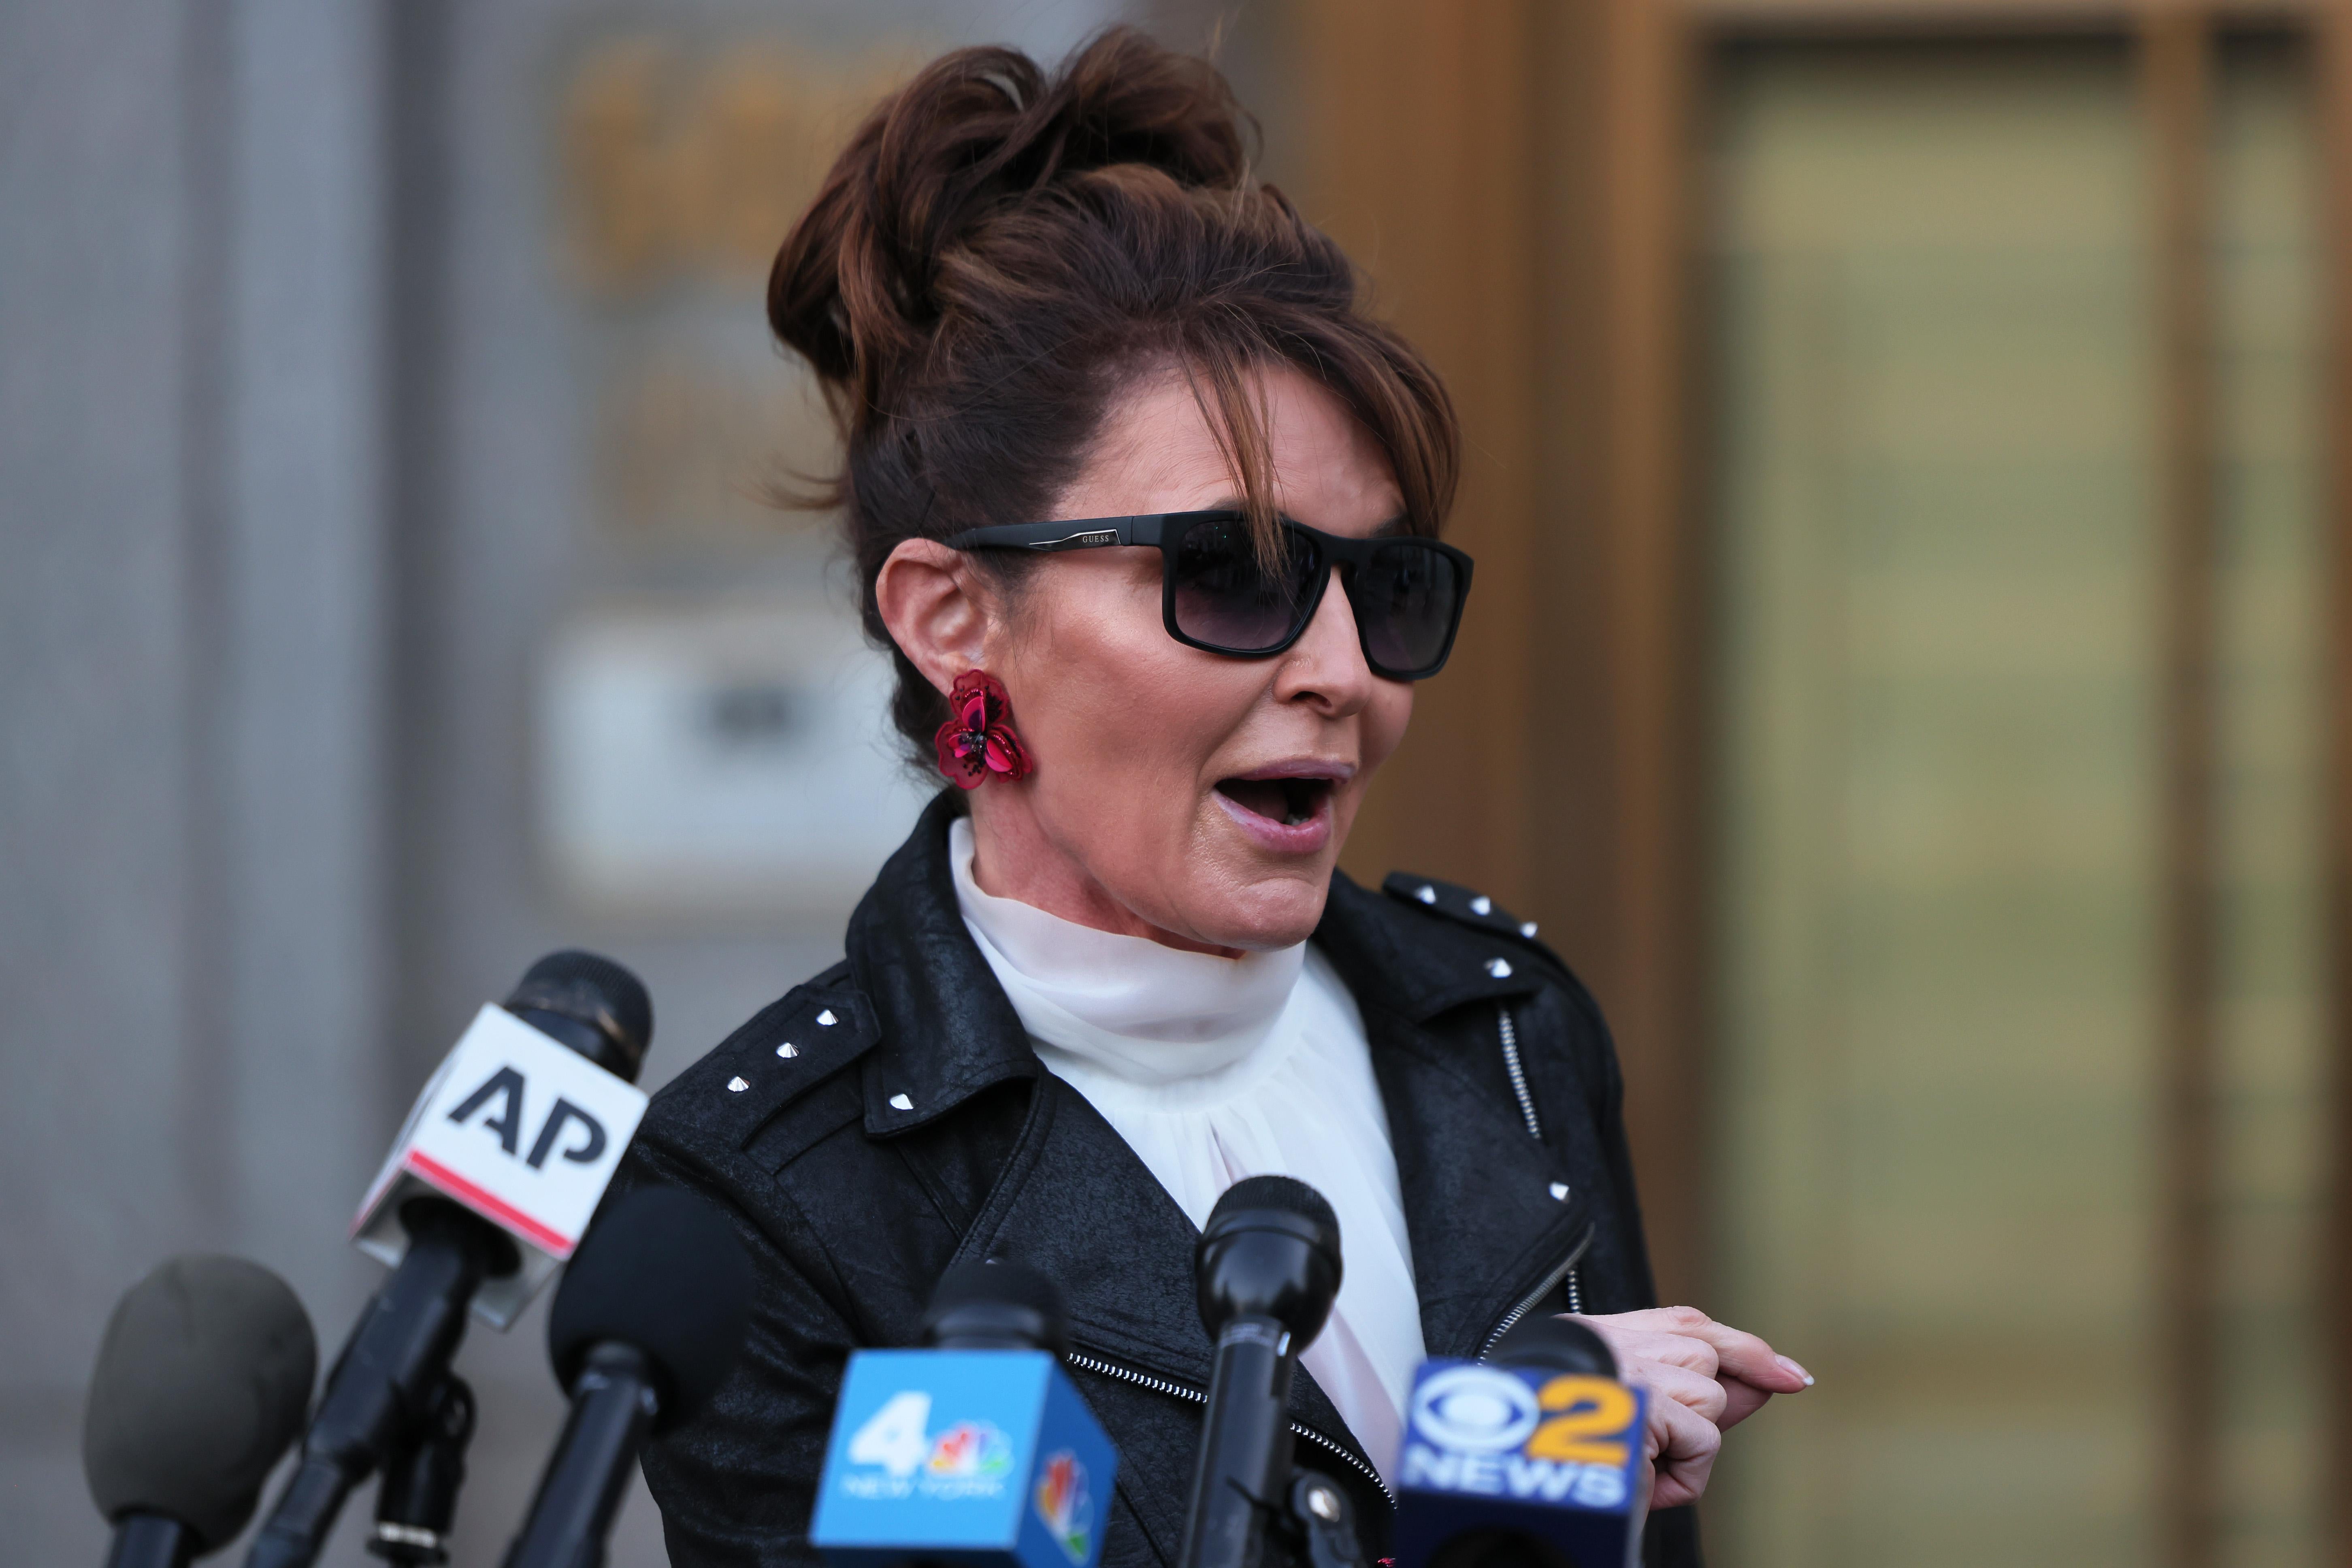 Palin in sunglasses and a black leather jacket speaks in front of a cluster of microphones outside